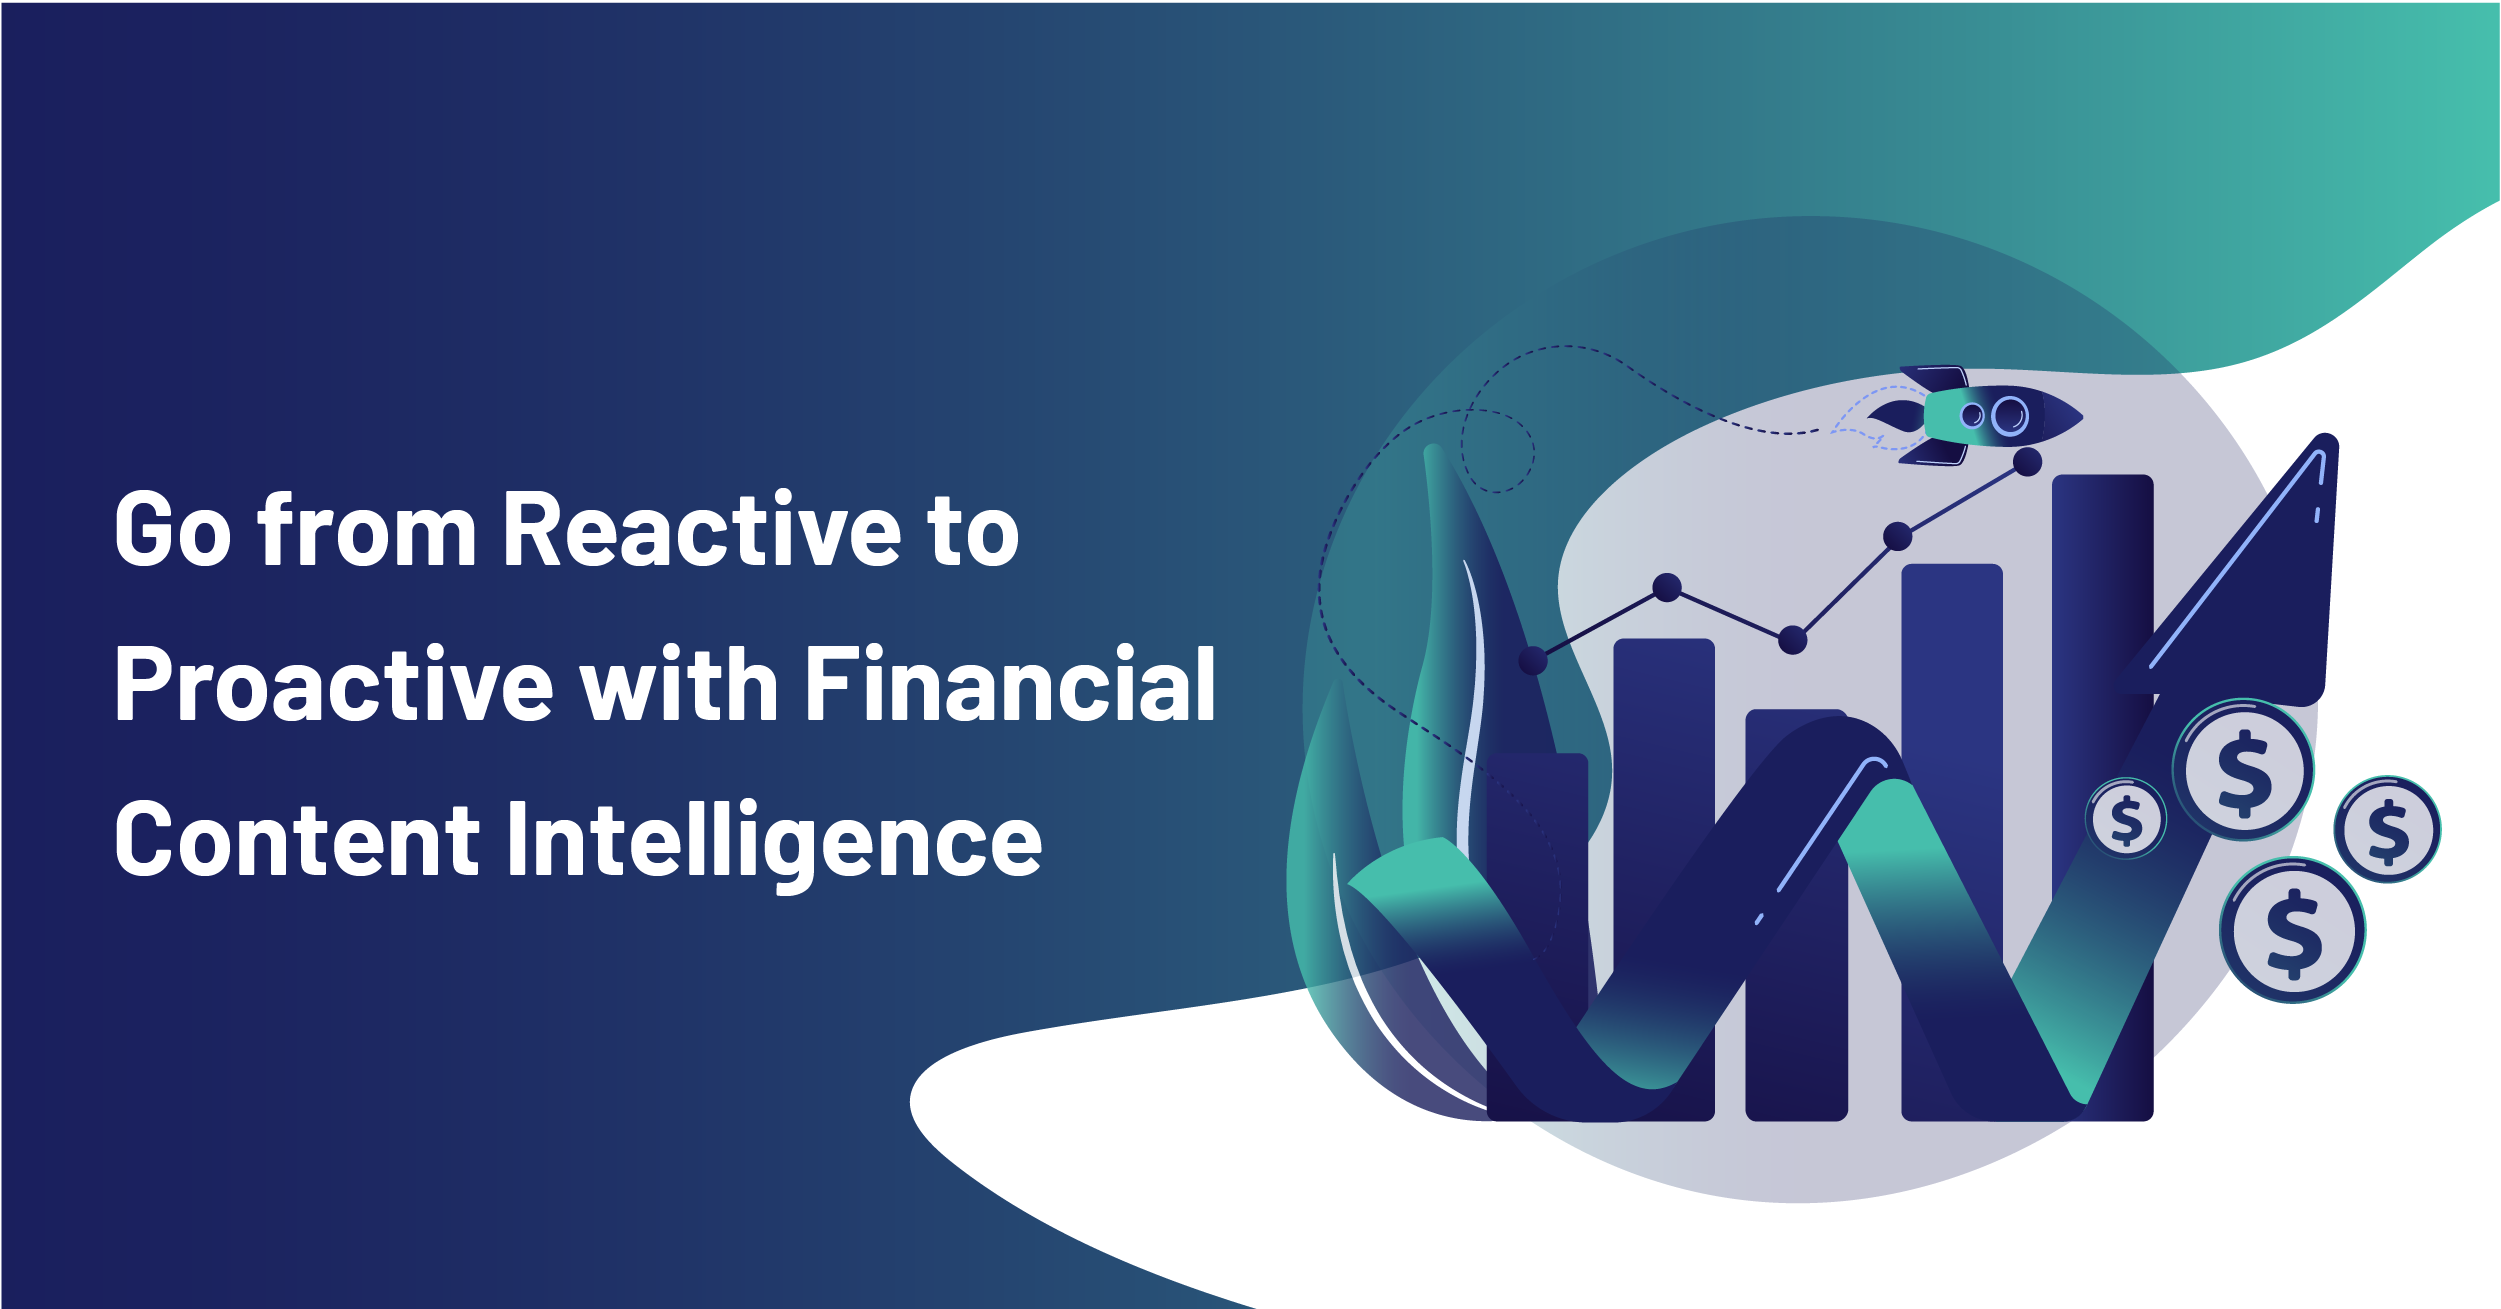 Go from Reactive to Proactive with Financial Content Intelligence